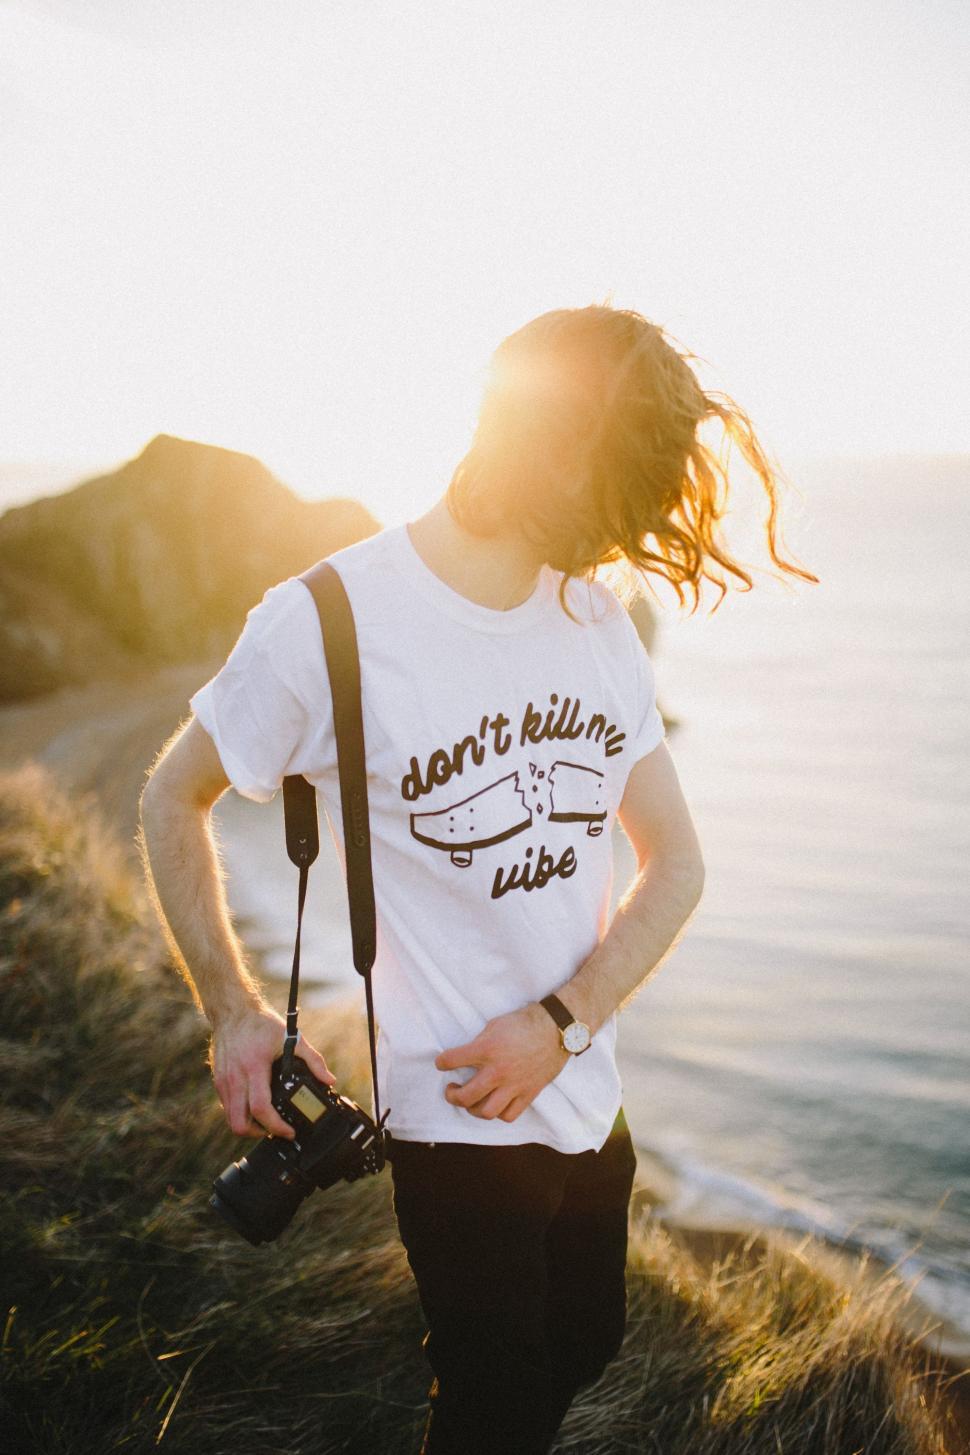 Free Image of Man With Dreadlocks Standing on Hill Next to Ocean 